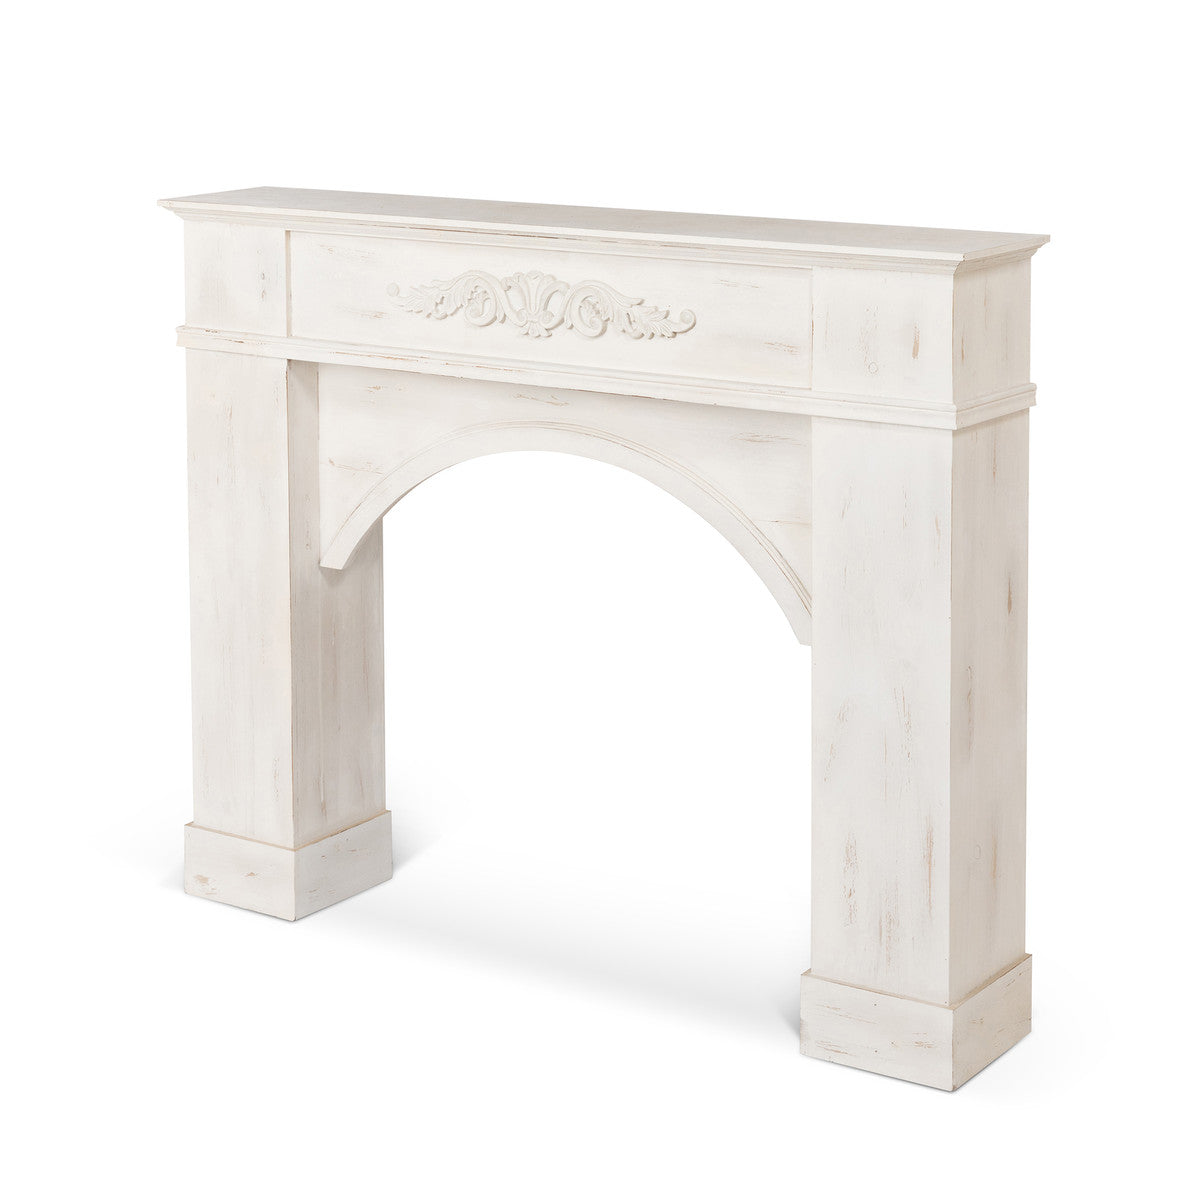 French Country Fireplace Mantel